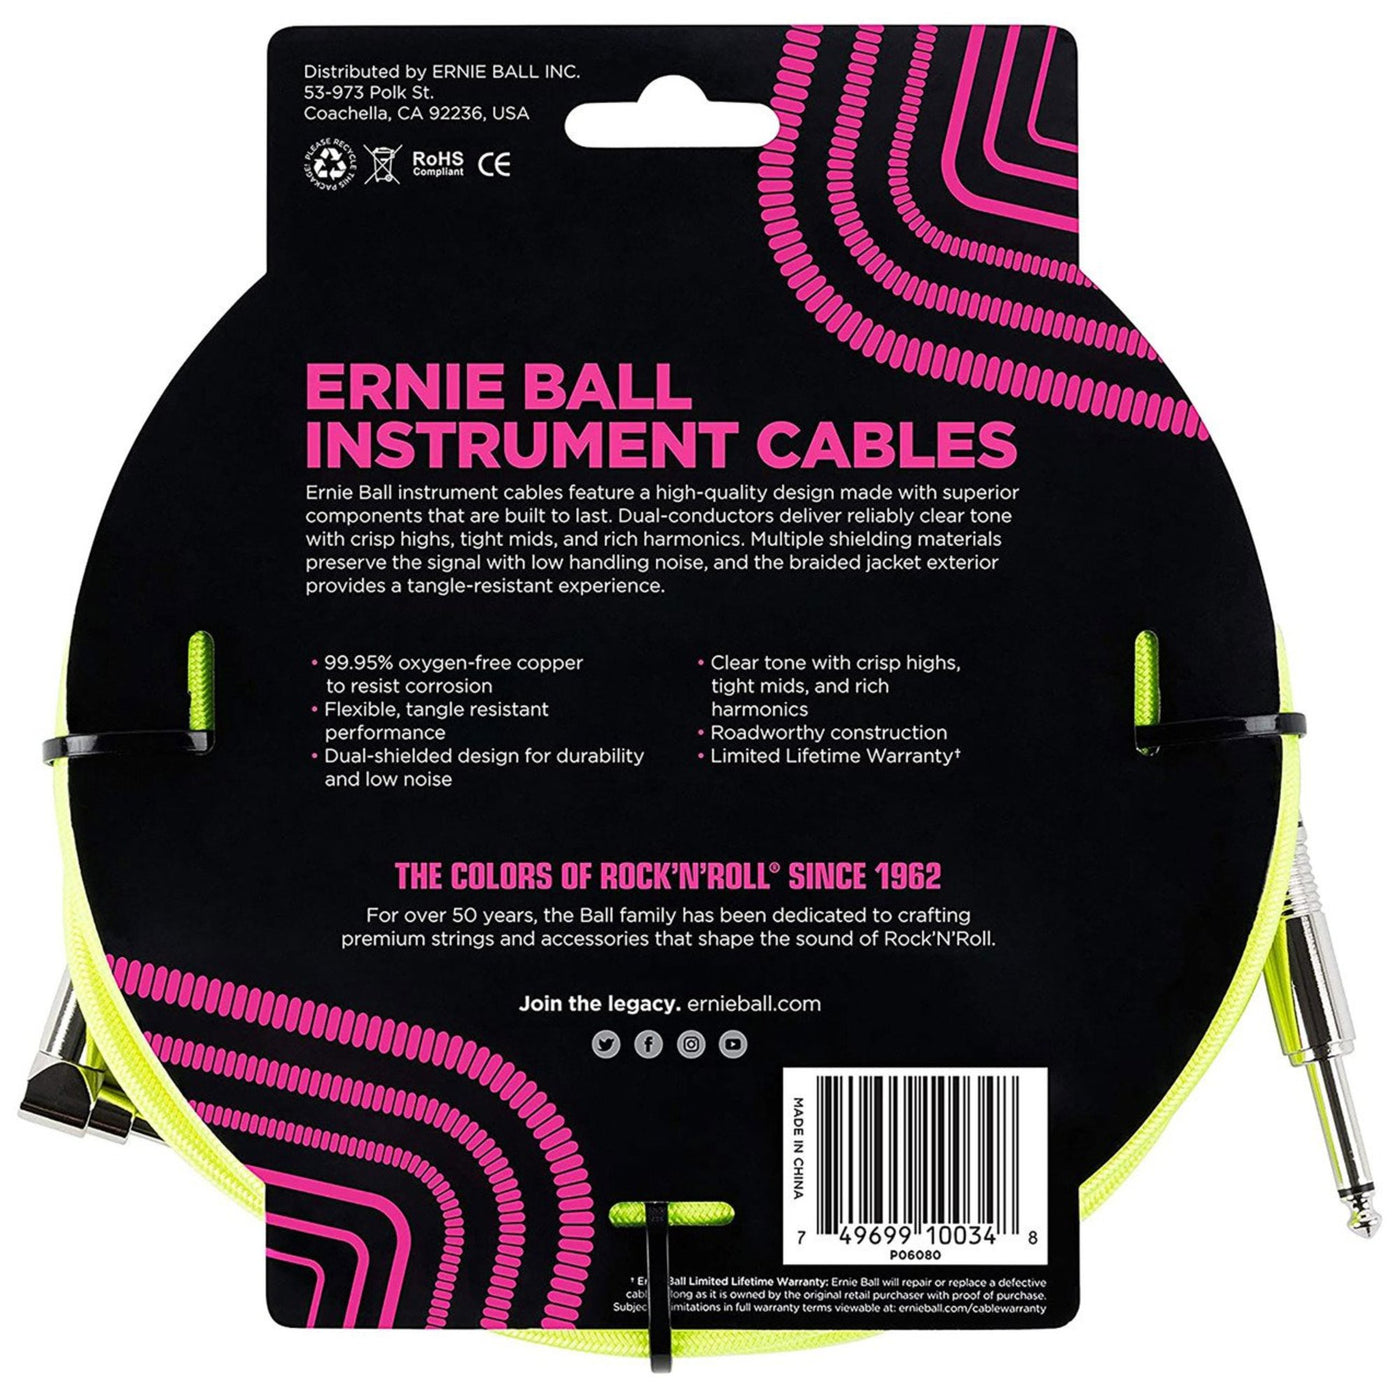 Ernie Ball 10' Instrument Cable, Neon Yellow